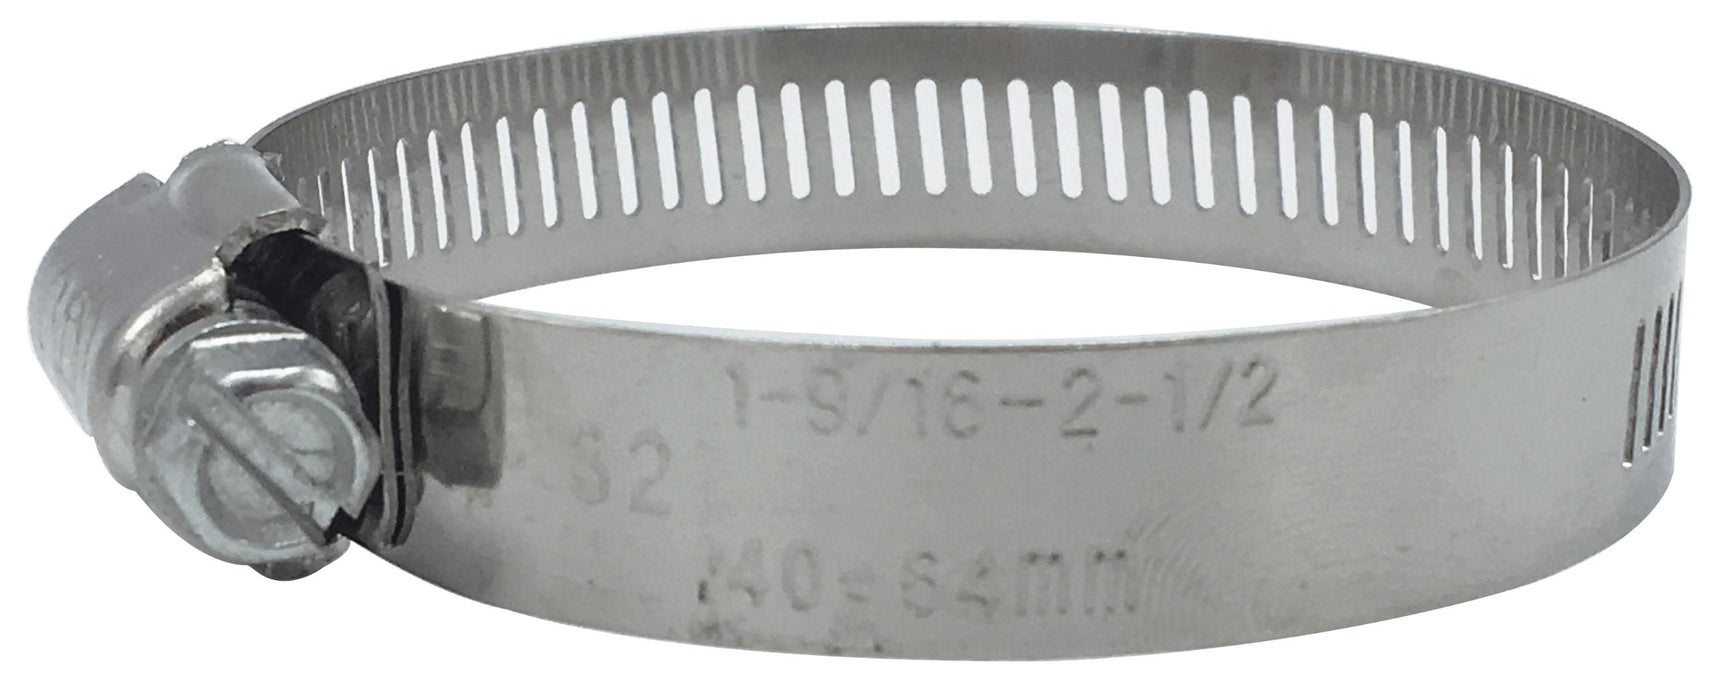 #20 1 1/4" Stainless Hose Clamp With Carbon Screw